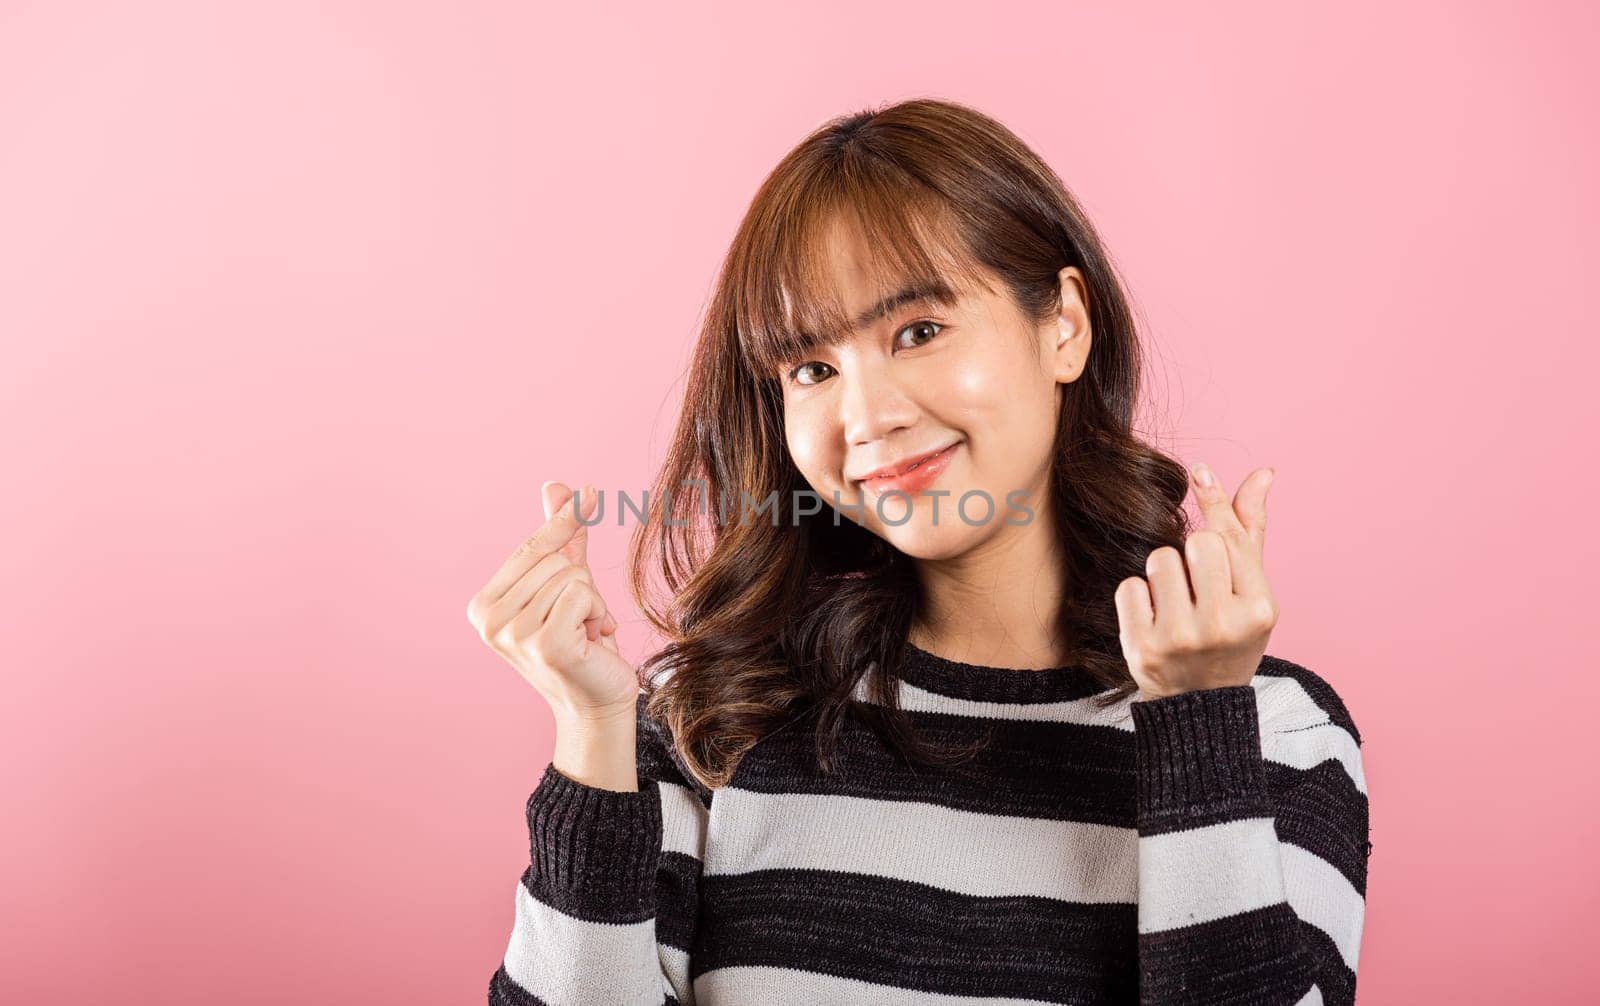 Portrait of a cheerful Asian woman making a mini heart sign with her finger, expressing happiness on a pink background. Sending love and joy for Valentine's Day with confidence in a studio shot.